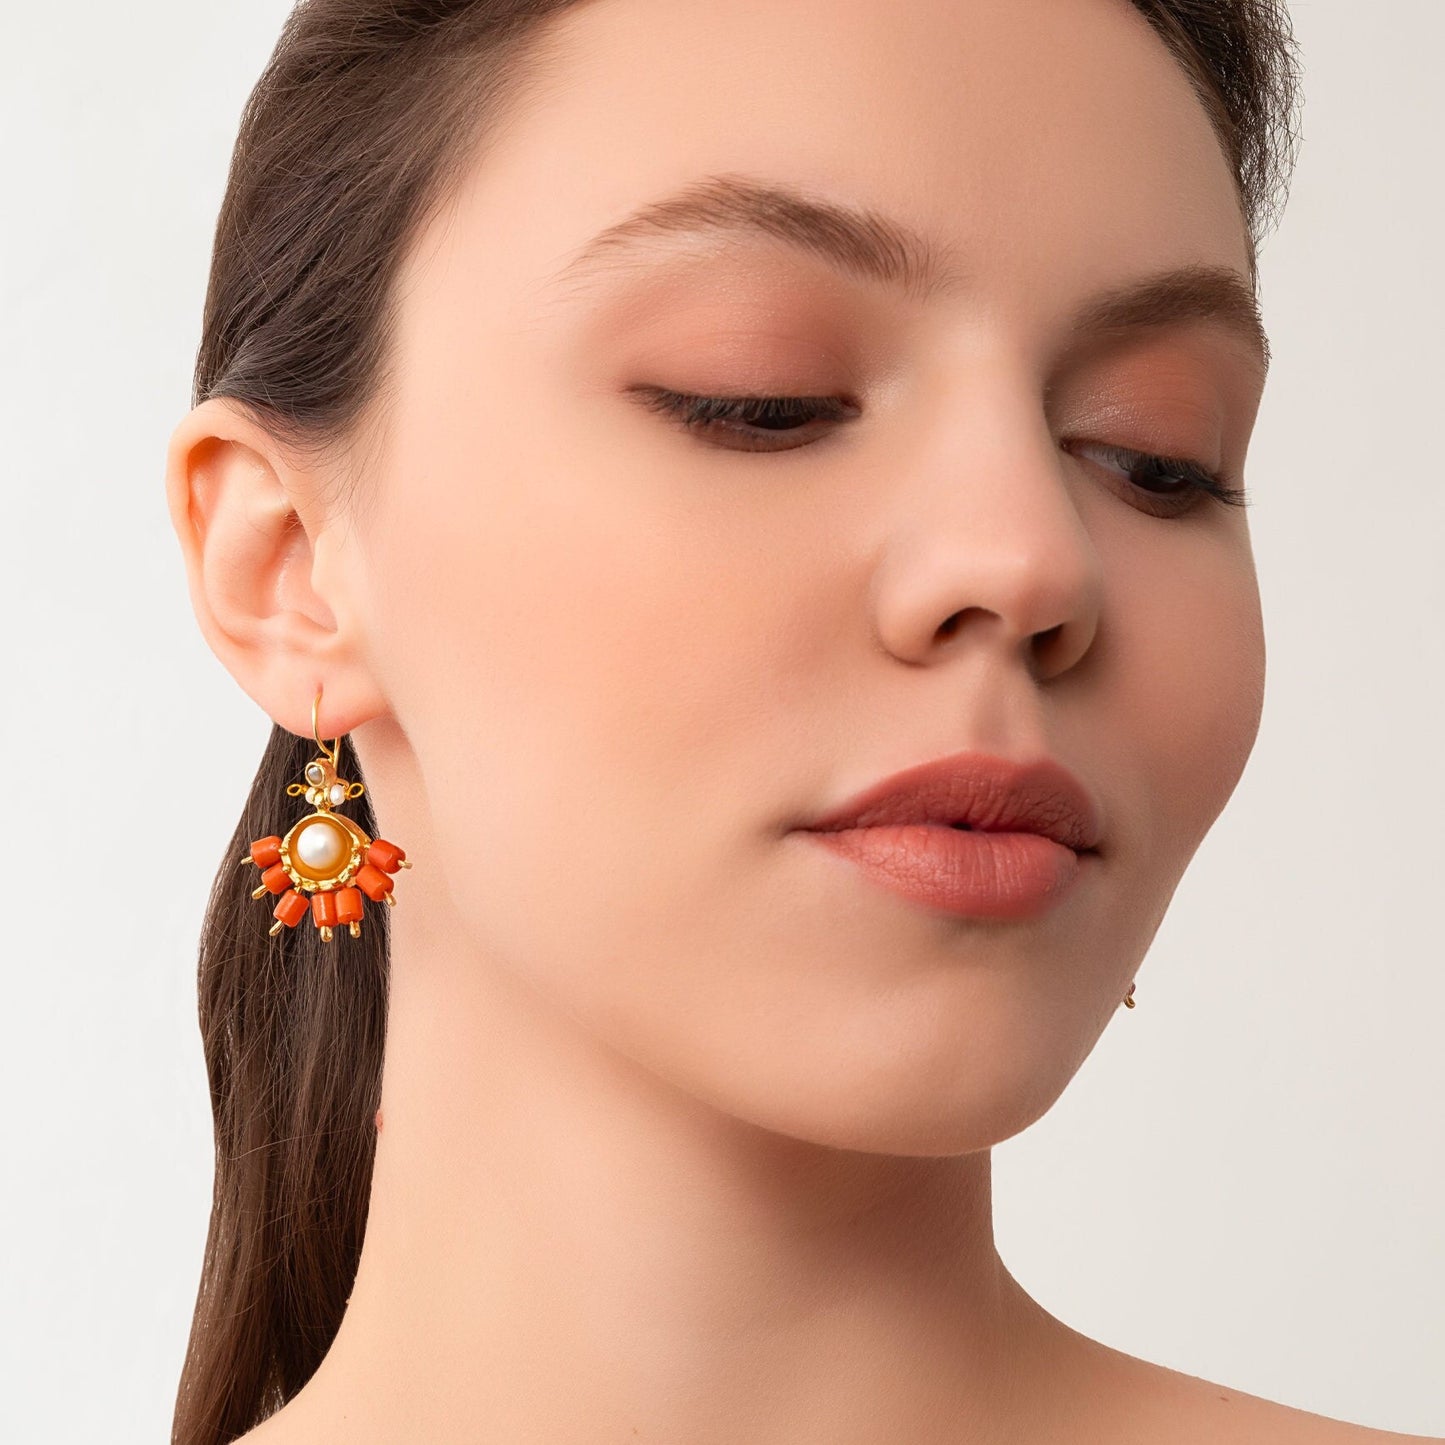 18k Gold Hellenistic Sunflower Coral Earrings with Pearl